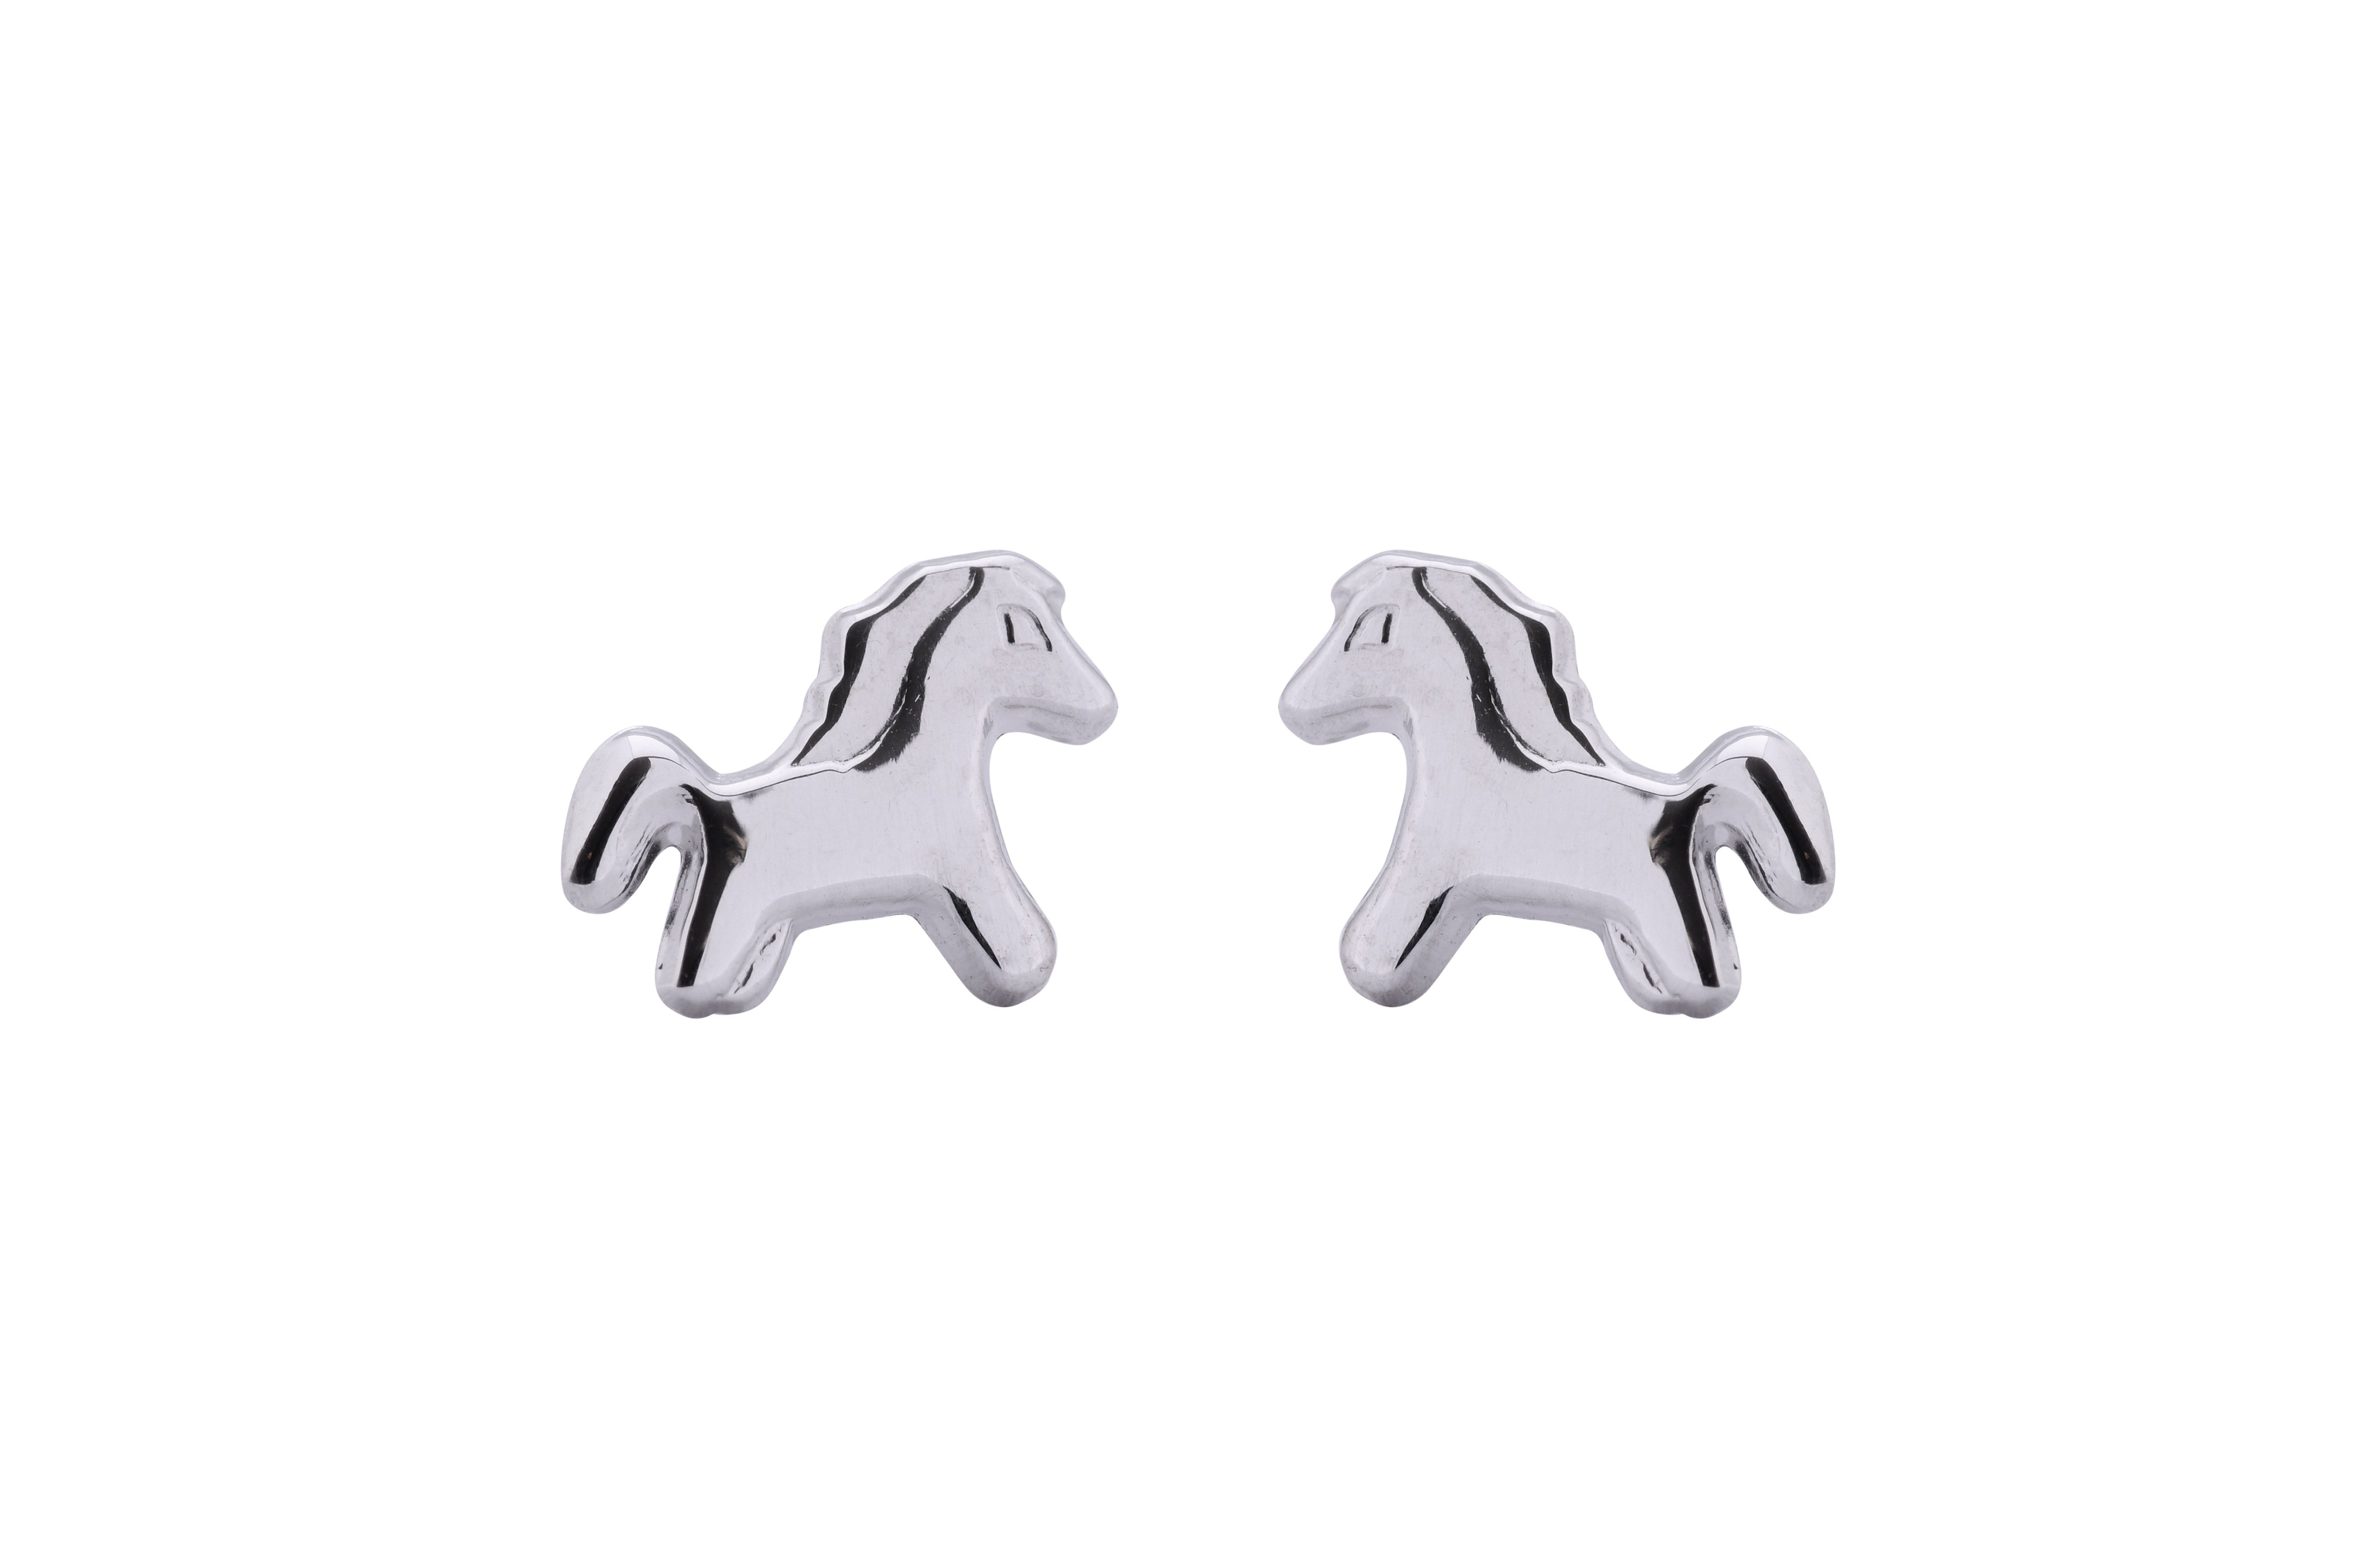 Baby Horse Pony Earrings in 14k White Gold - image 3 of 4